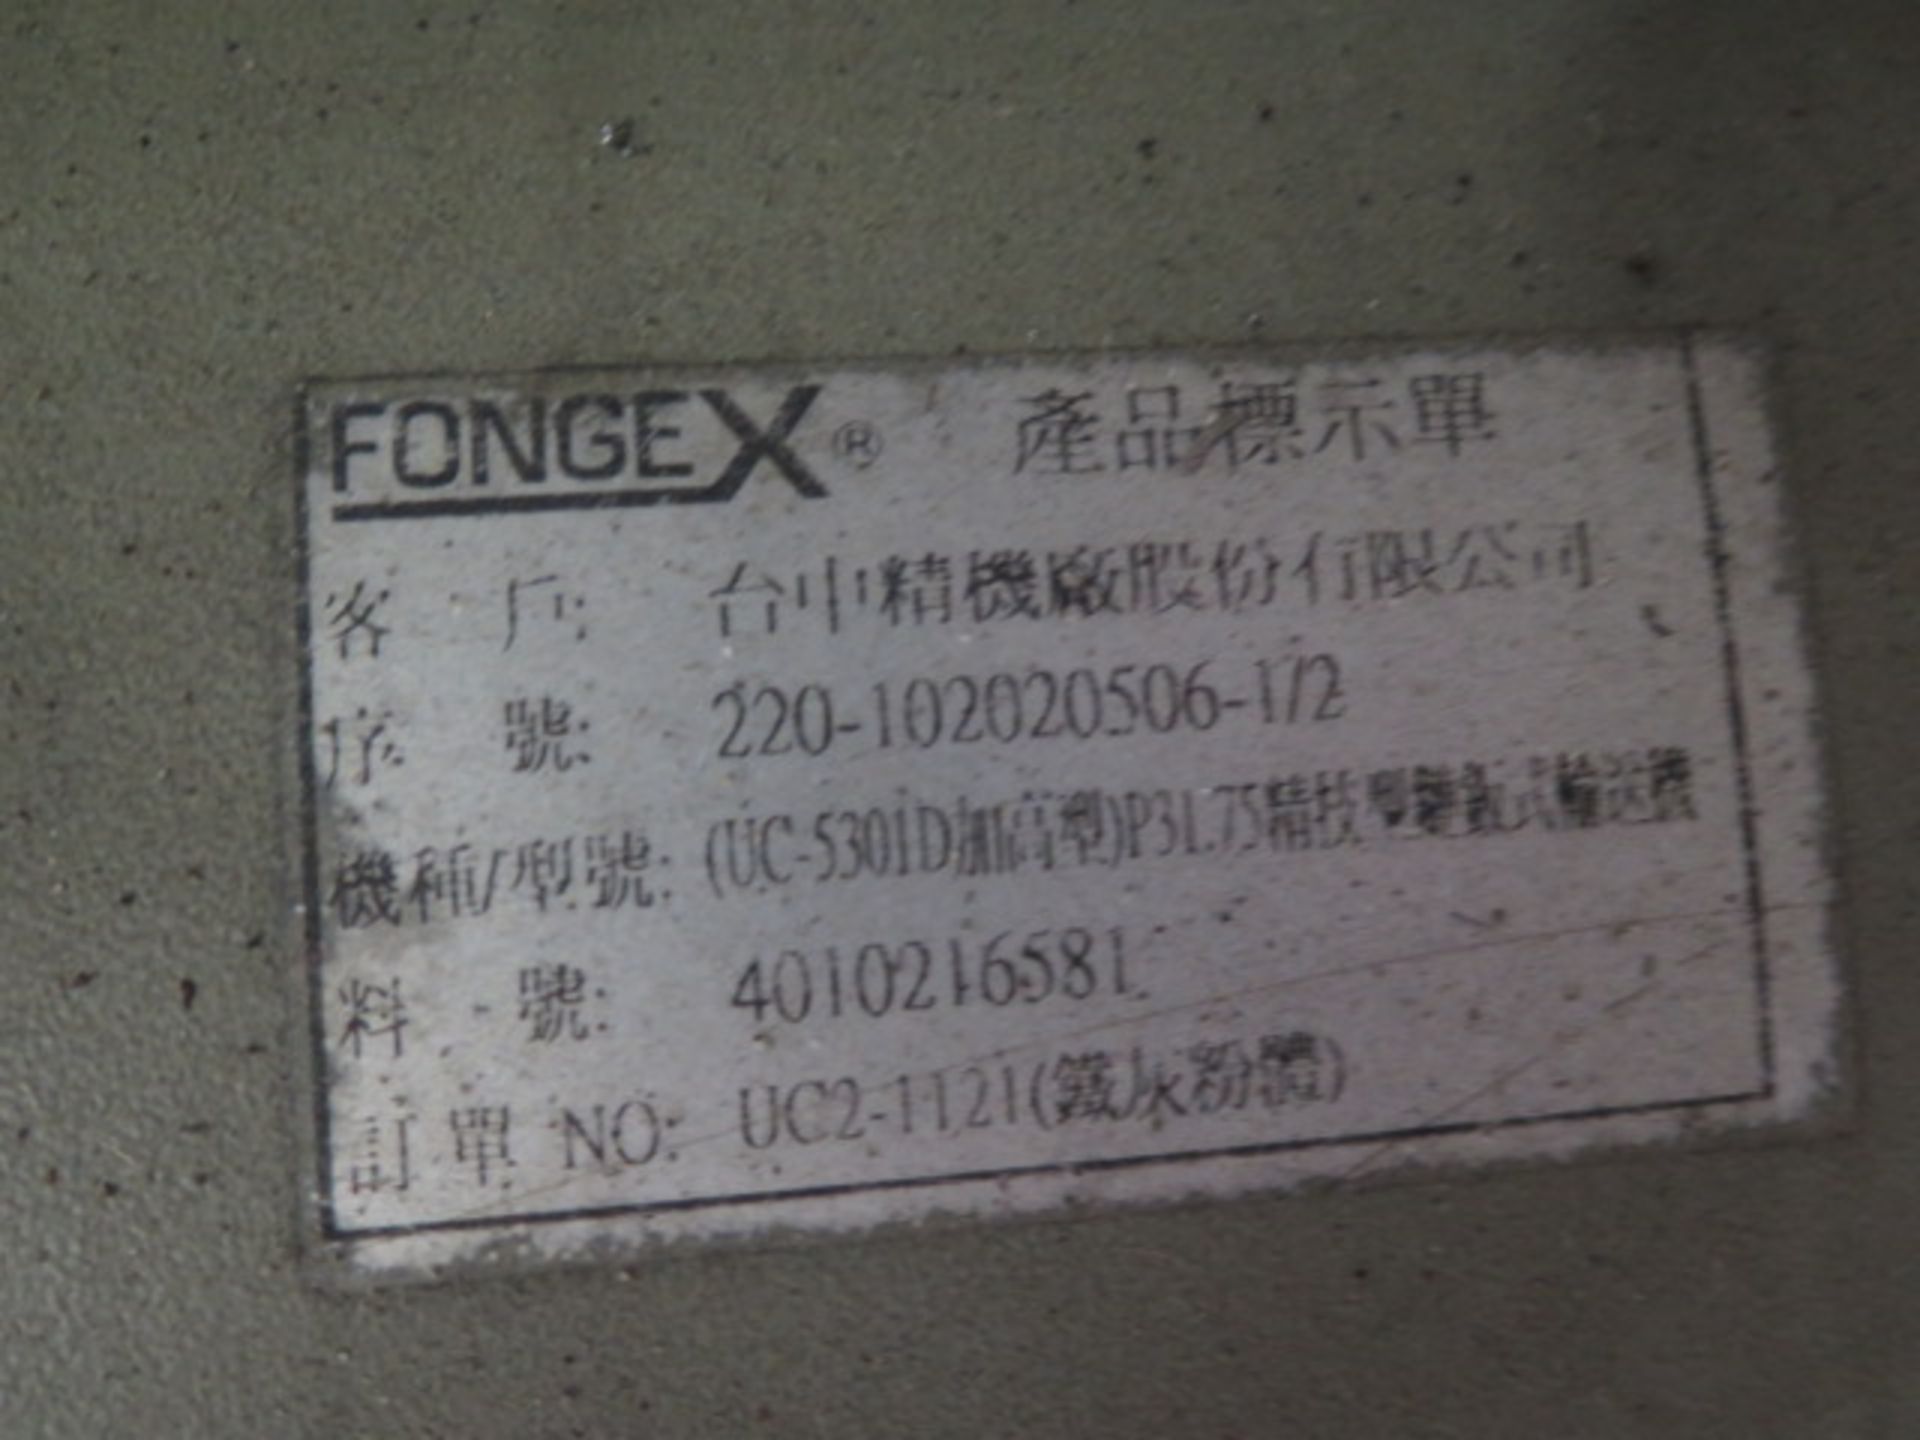 Fongex 9" Chip Conveyor - Fits Into 19" x 60" Machine Opening (SOLD AS-IS - NO WARRANTY) - Image 3 of 3